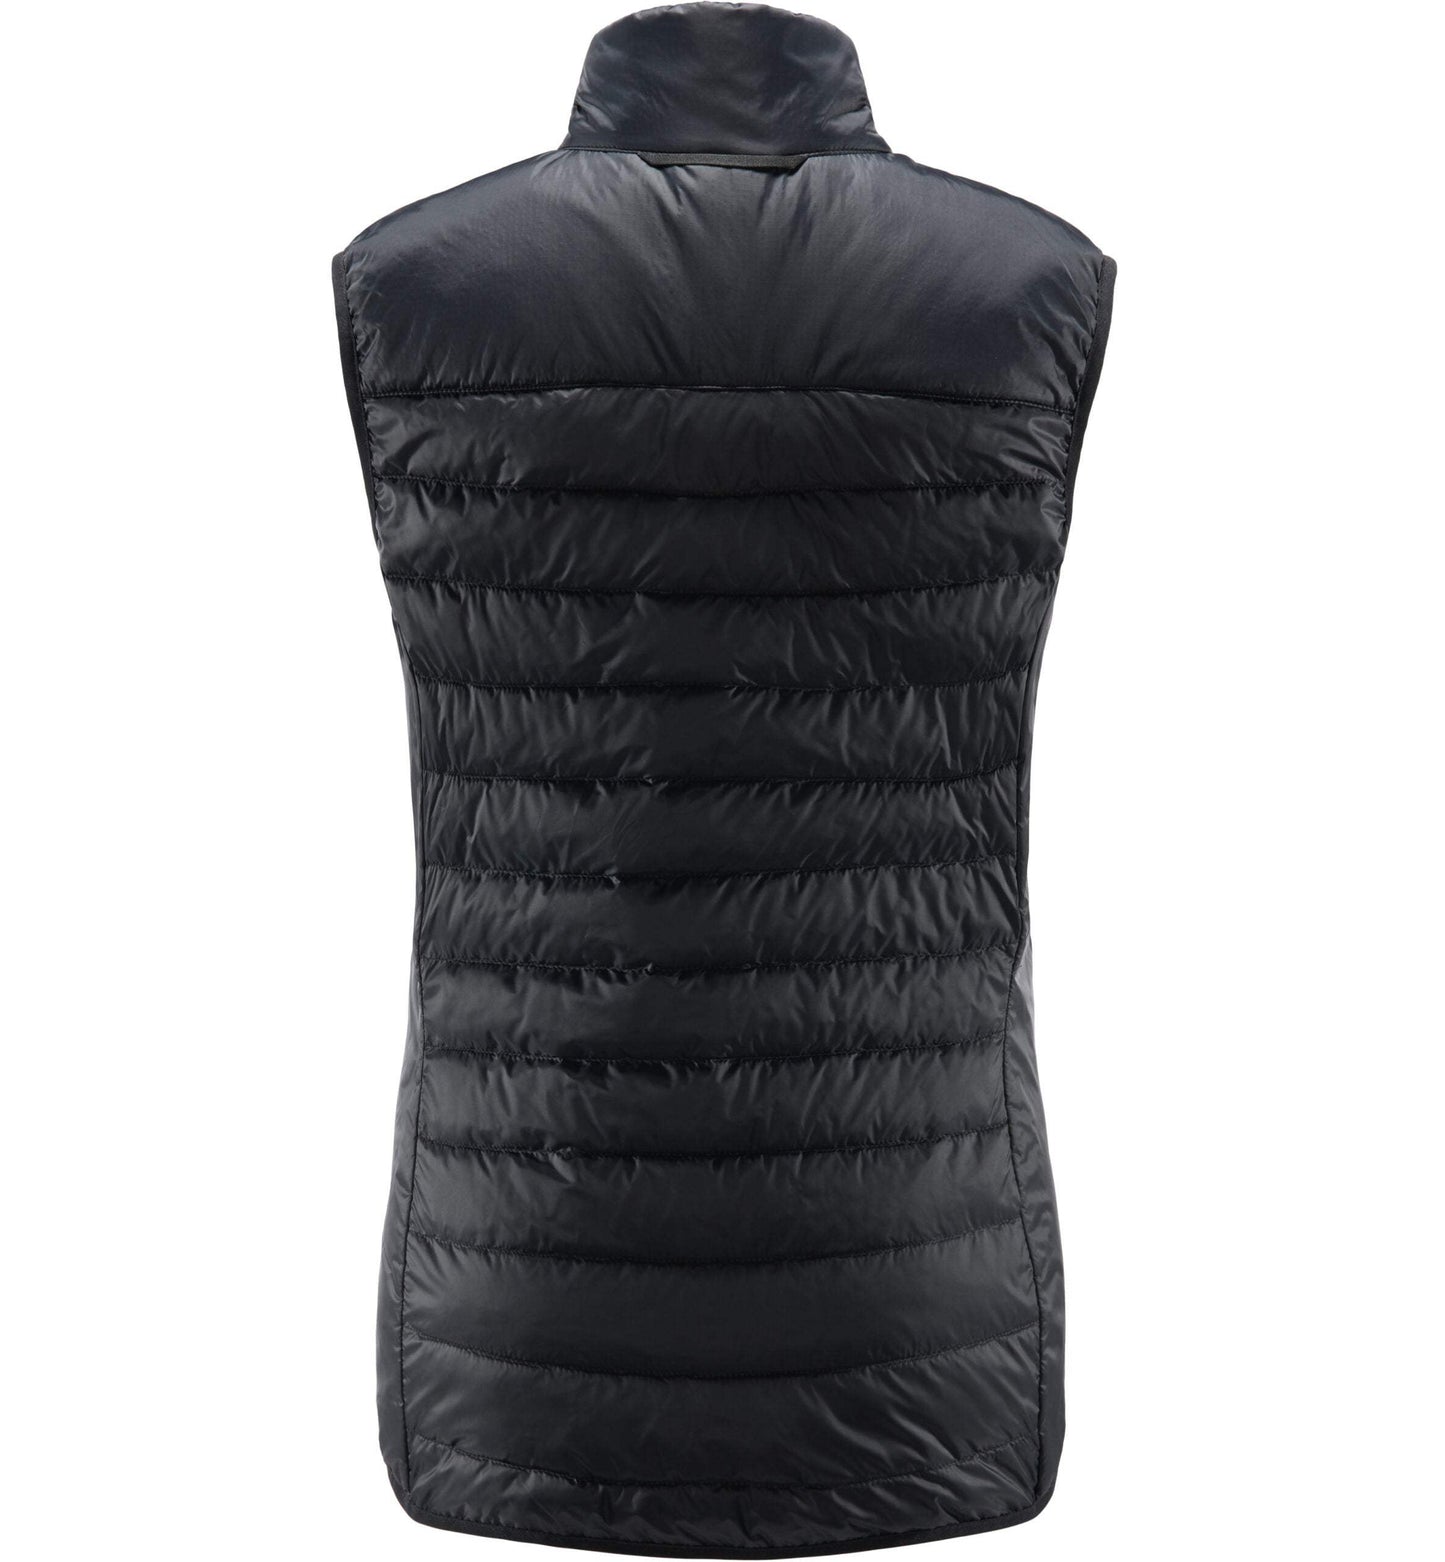 Haglofs Women’s Spire Mimic Vest - The Luxury Promotional Gifts Company Limited